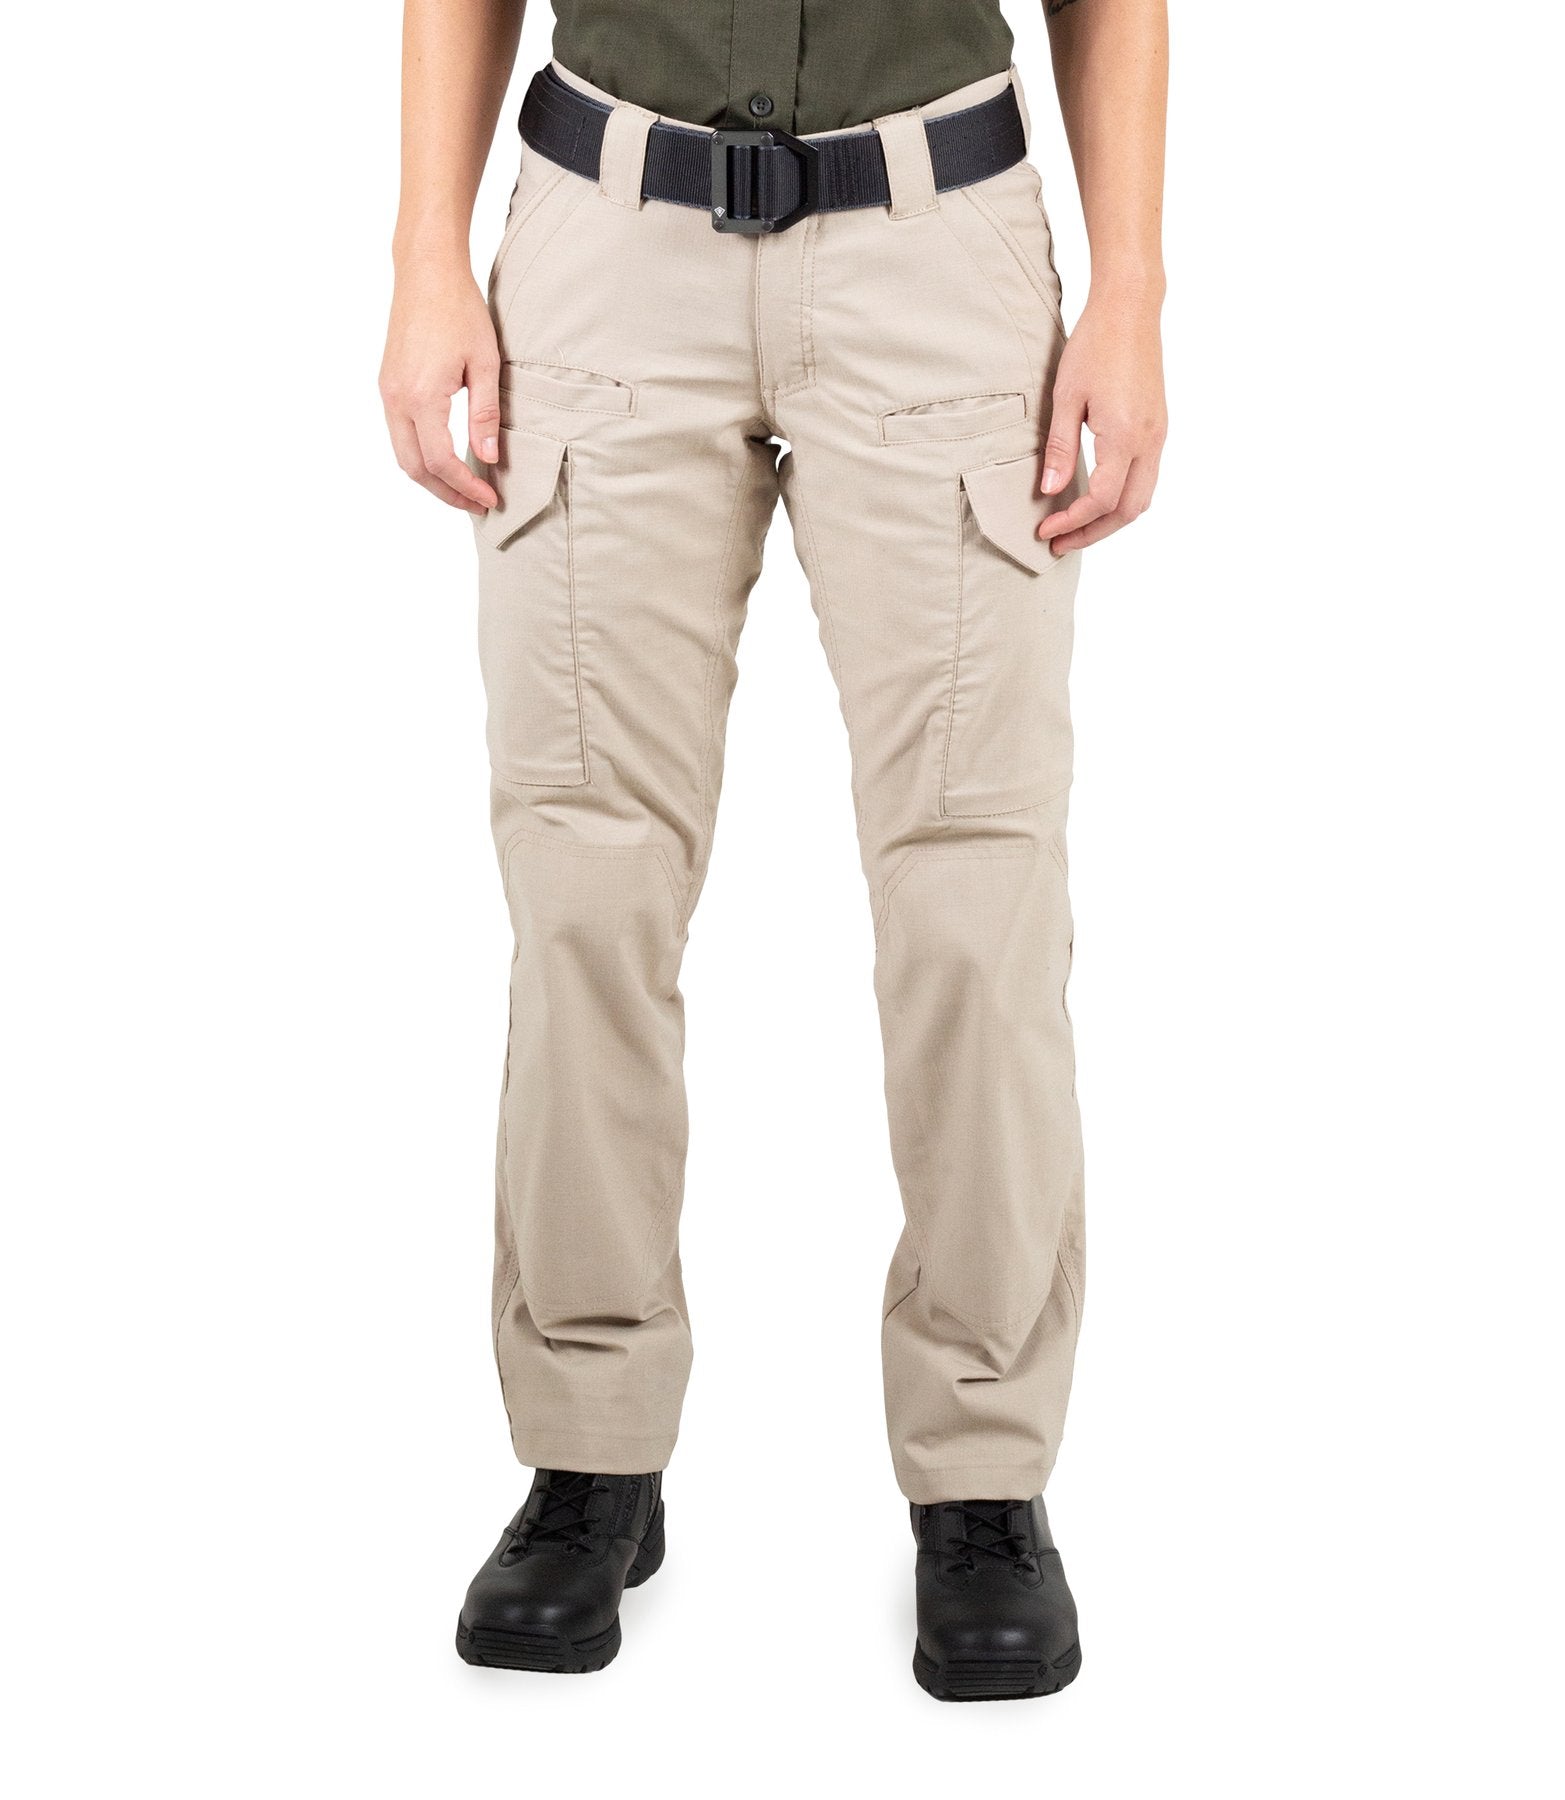 511 Tactical Pants Womens 12 Beige Cargo Outdoors Hunting Series Shooting  30X30